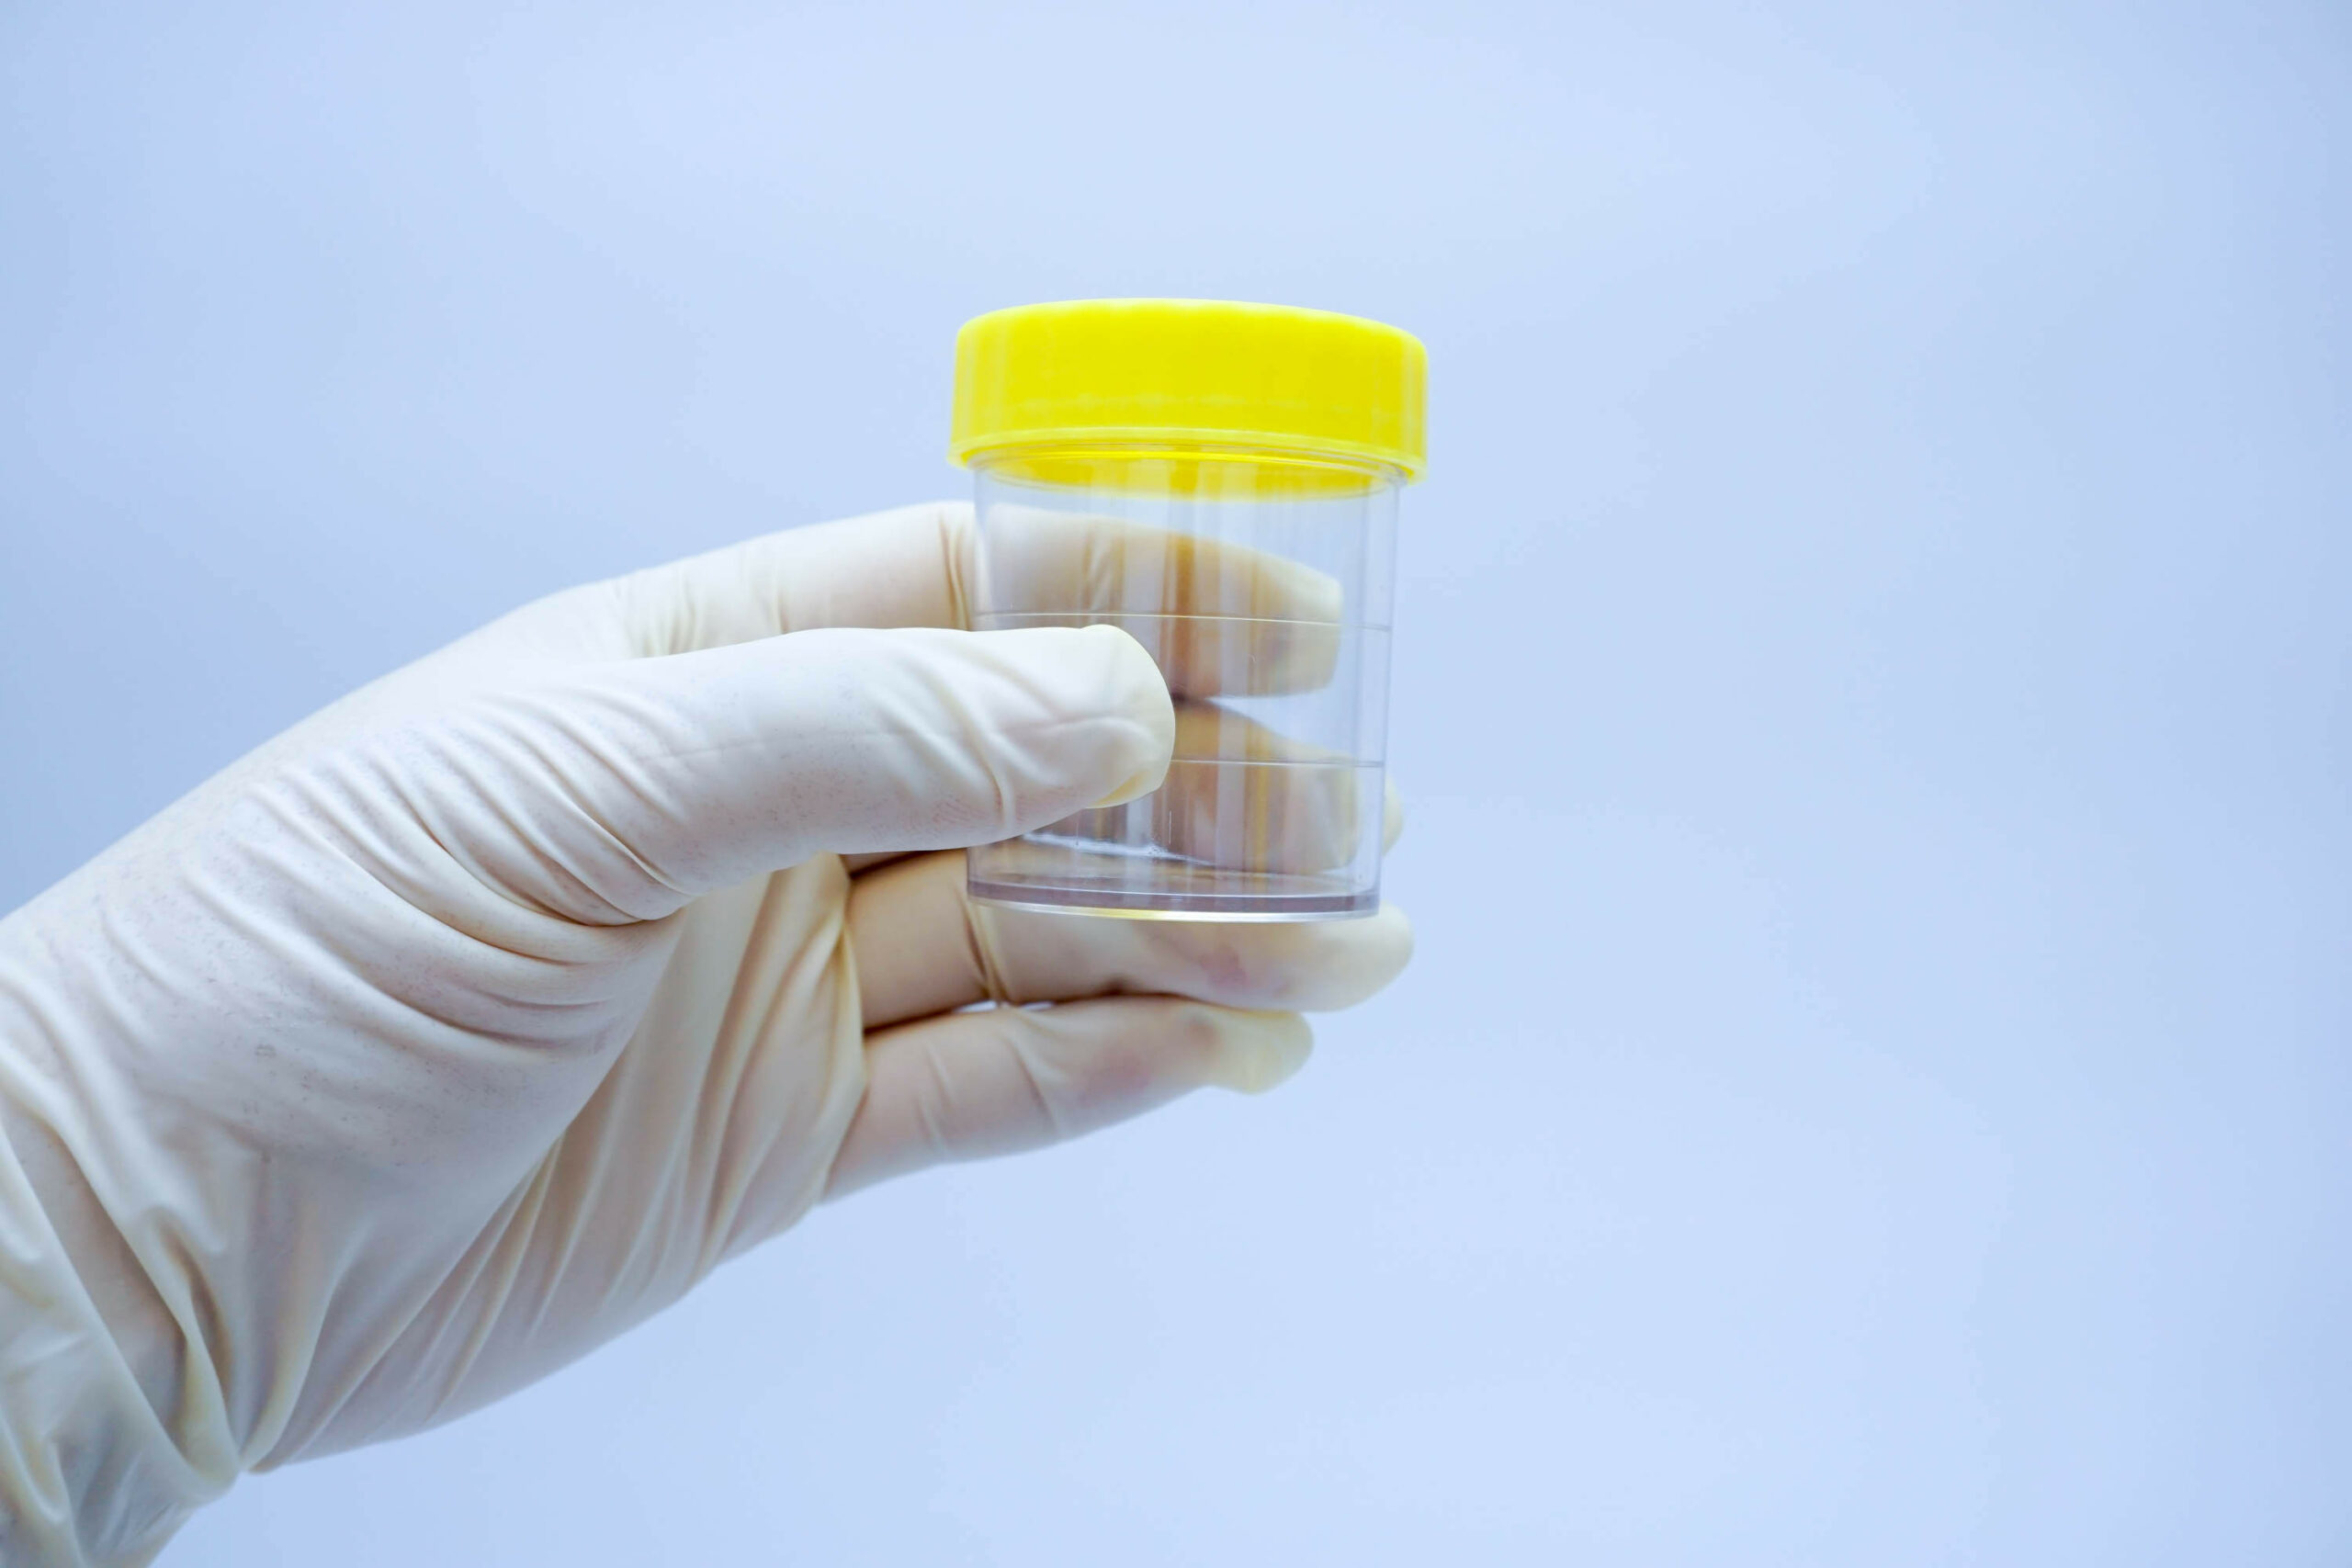 Hand with medical gloves holding Urine sample container